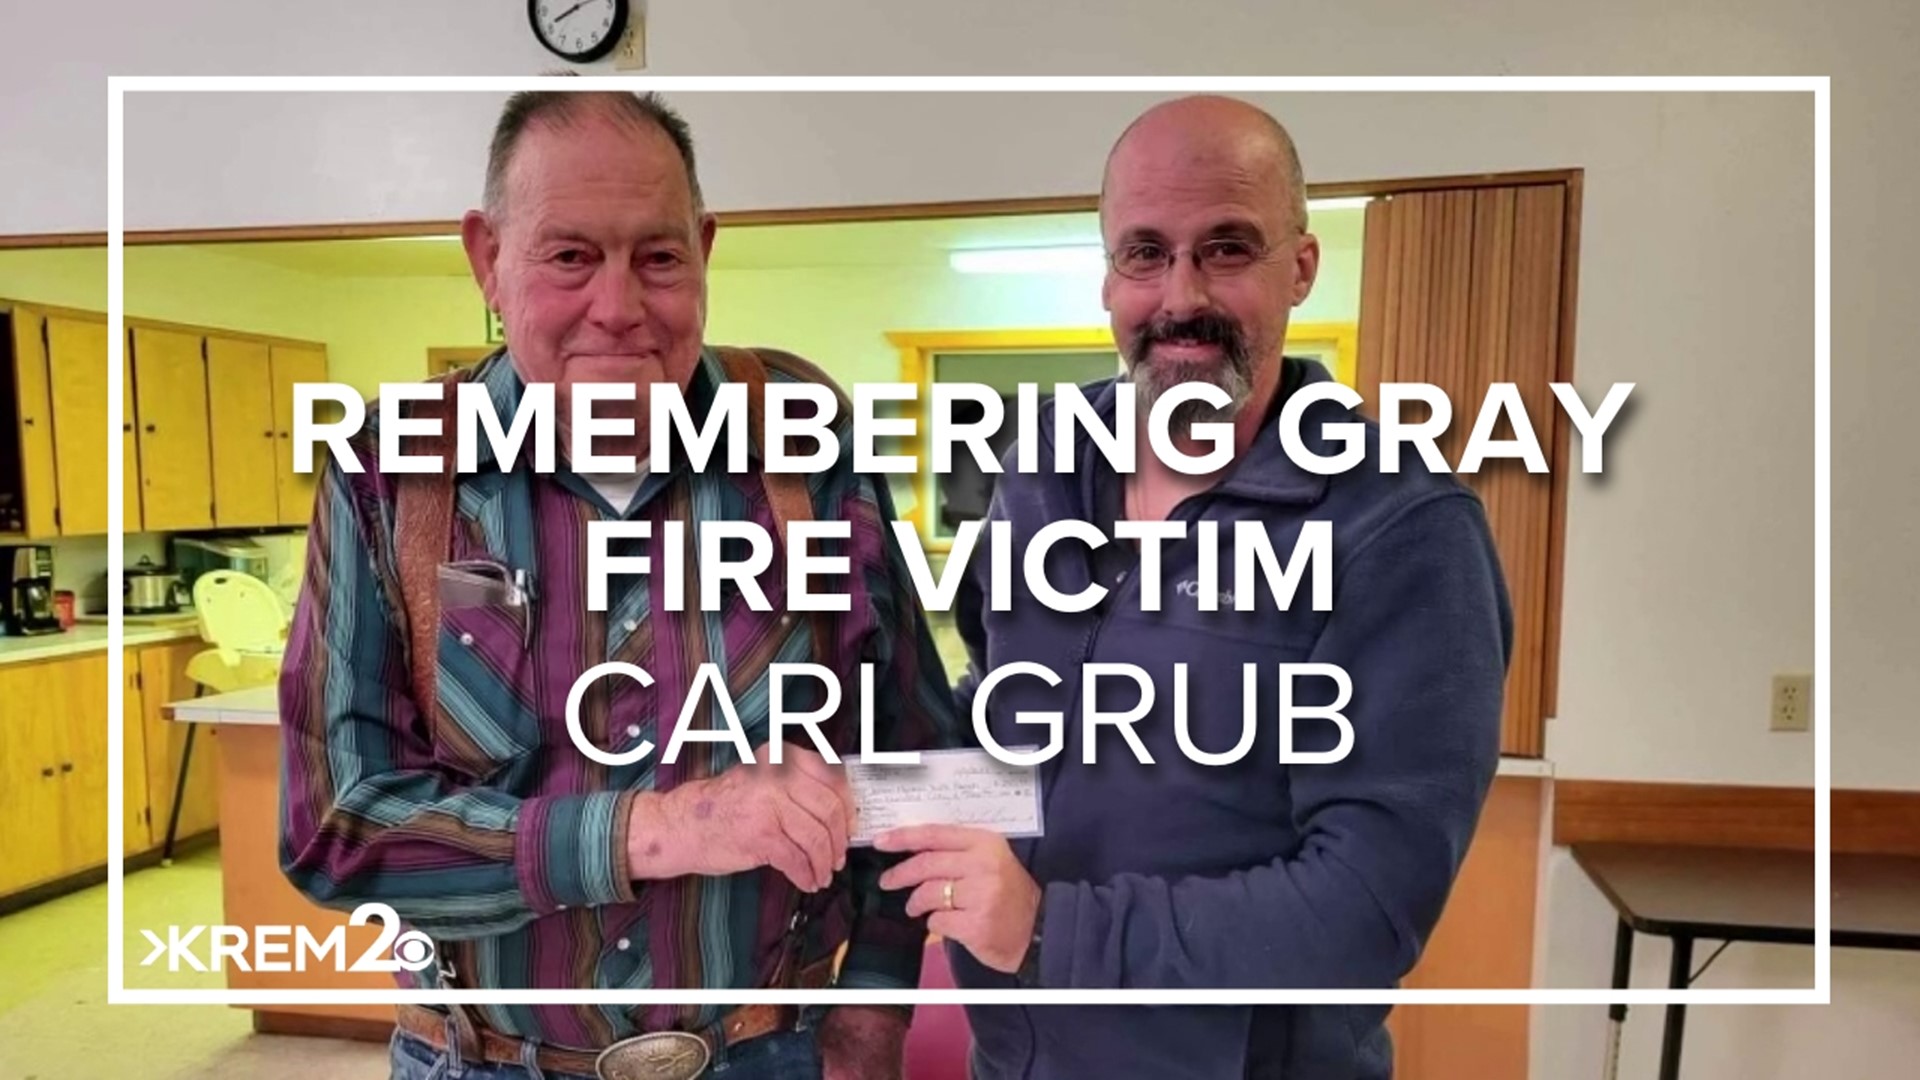 Carl Grub, 86, was tragically killed in the Gray Fire burning in Medical Lake. Those who knew him say his death left a huge hole in the community.